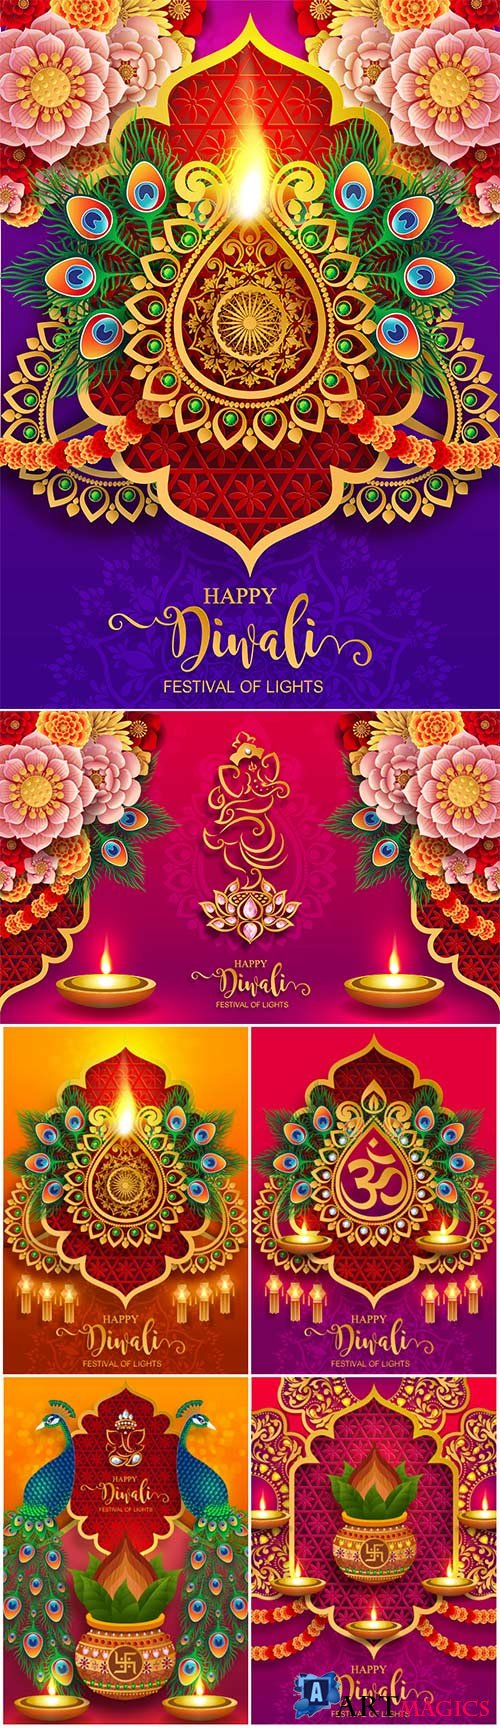 Happy Diwali festival vector card with gold diya patterned